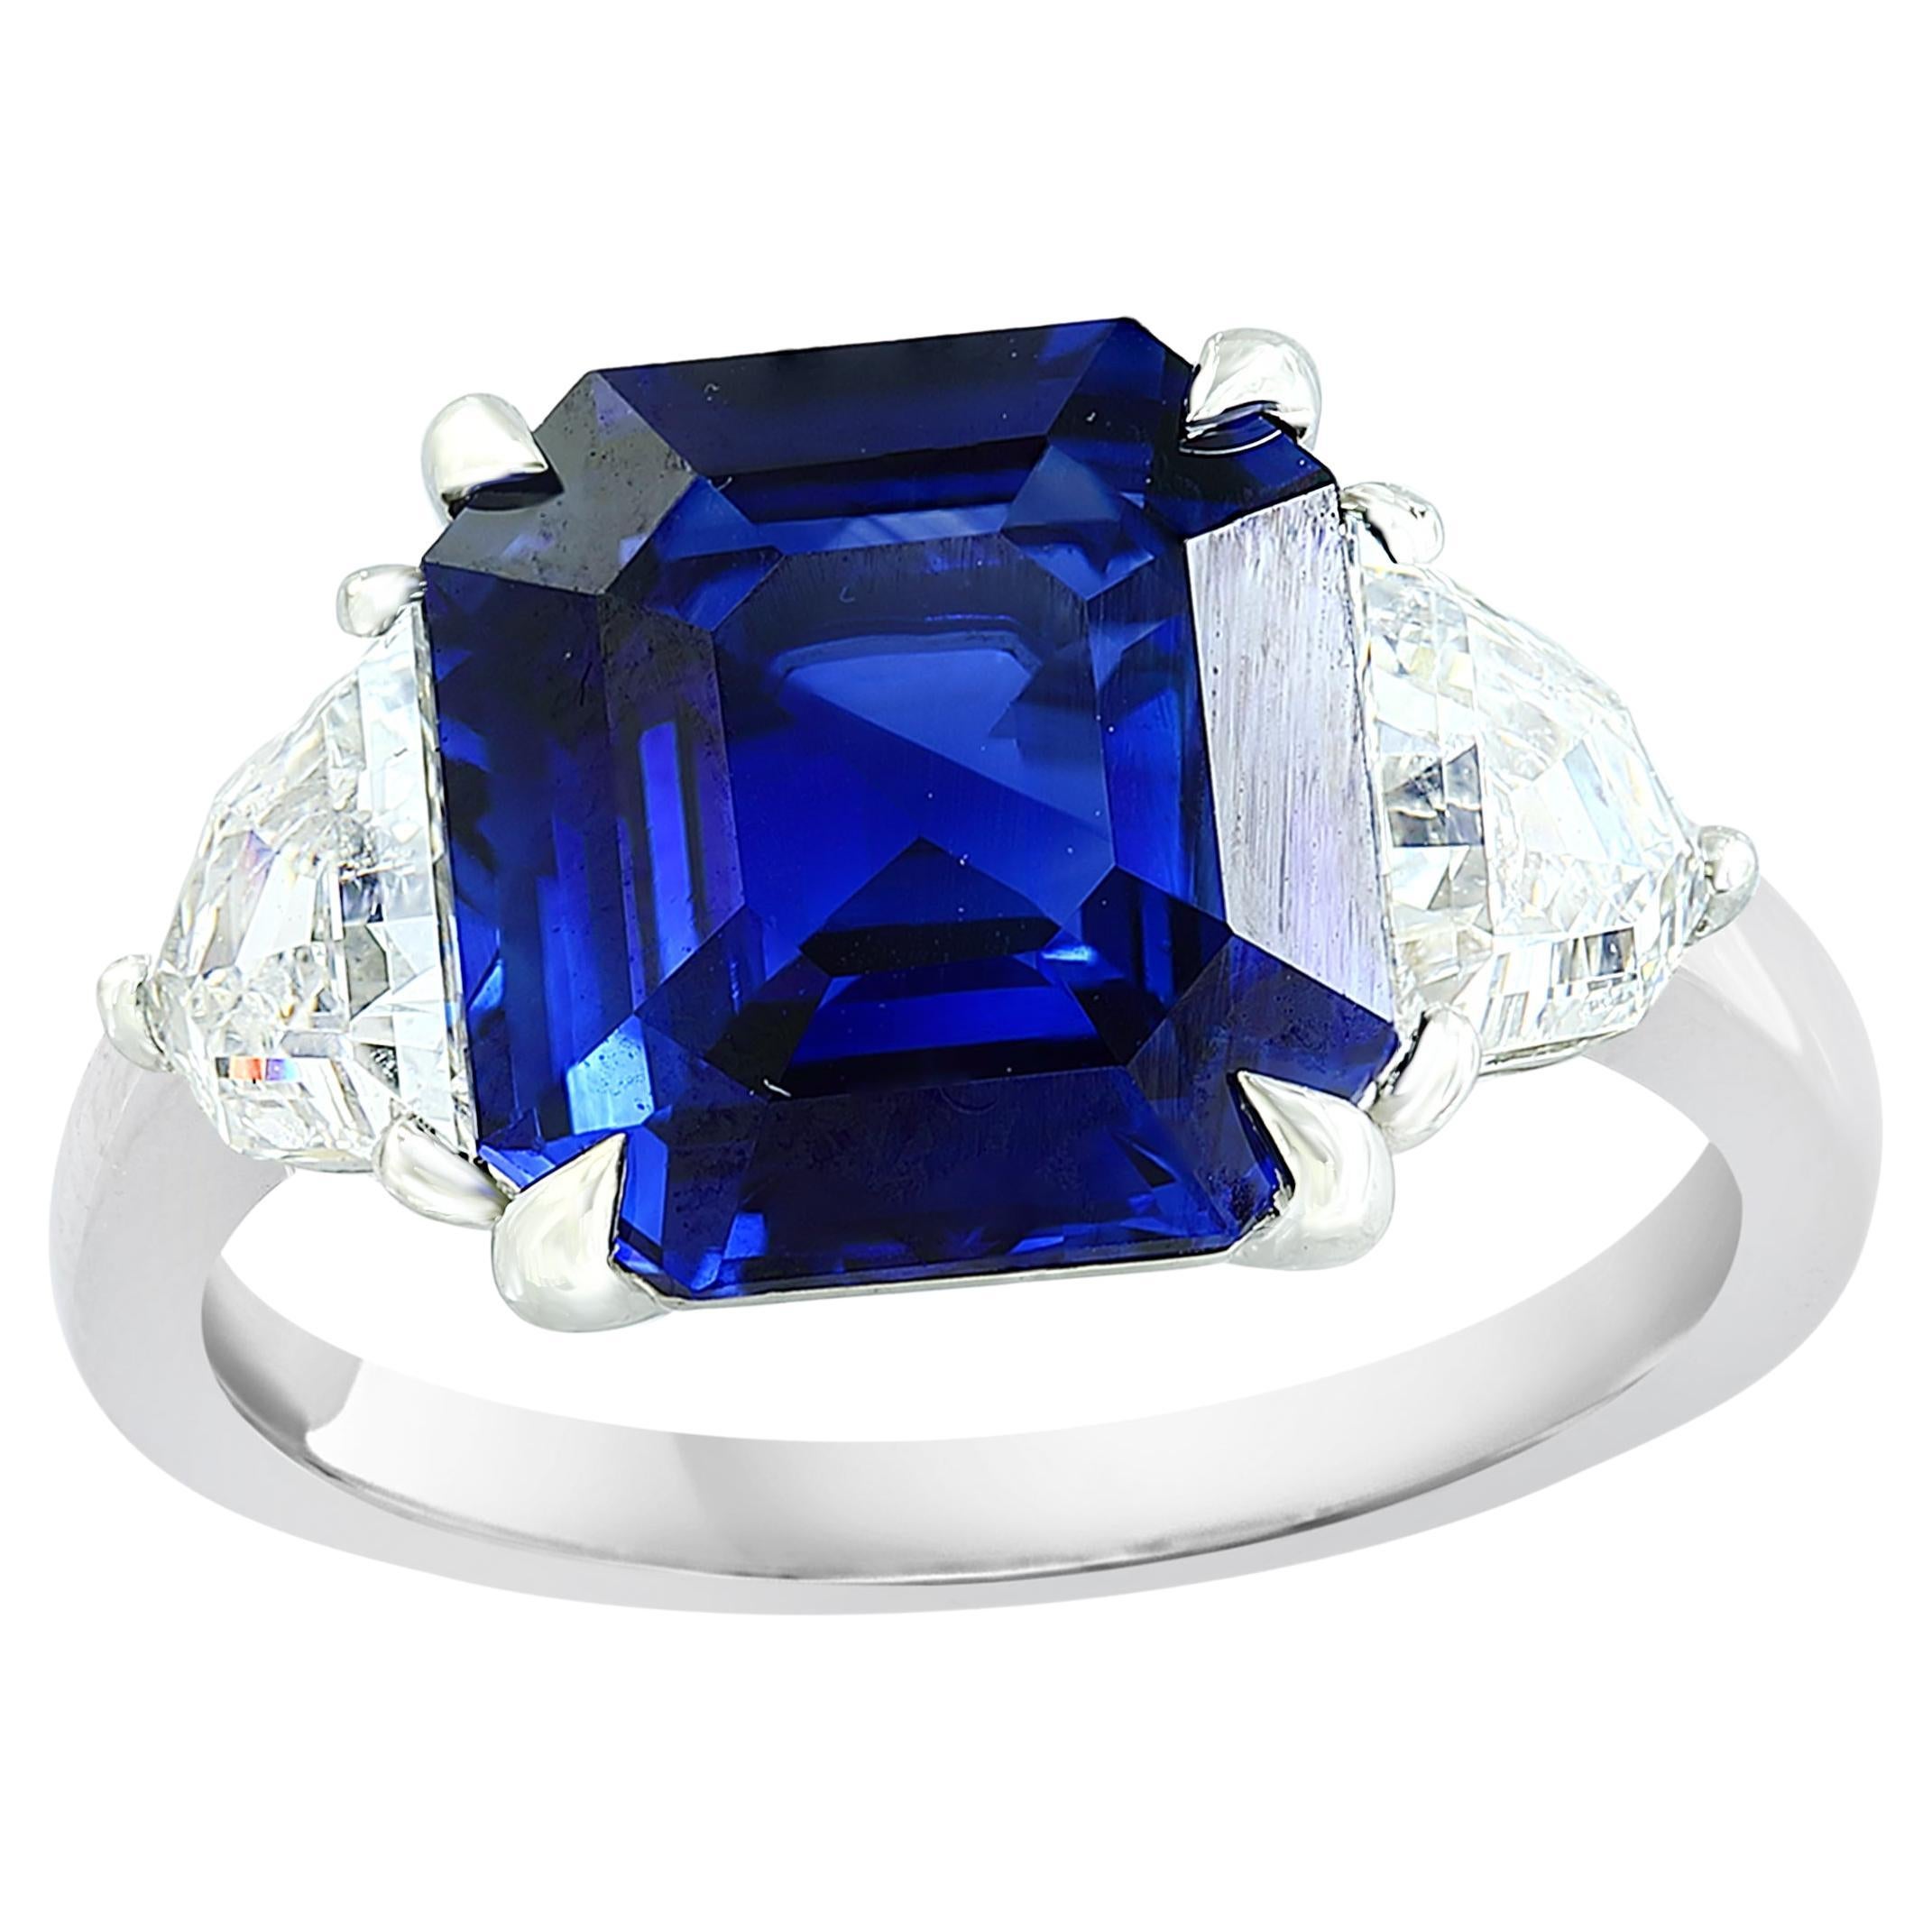 Certified 3.58 Carat Emerald Cut Sapphire & Diamond Engagement Ring in Platinum For Sale